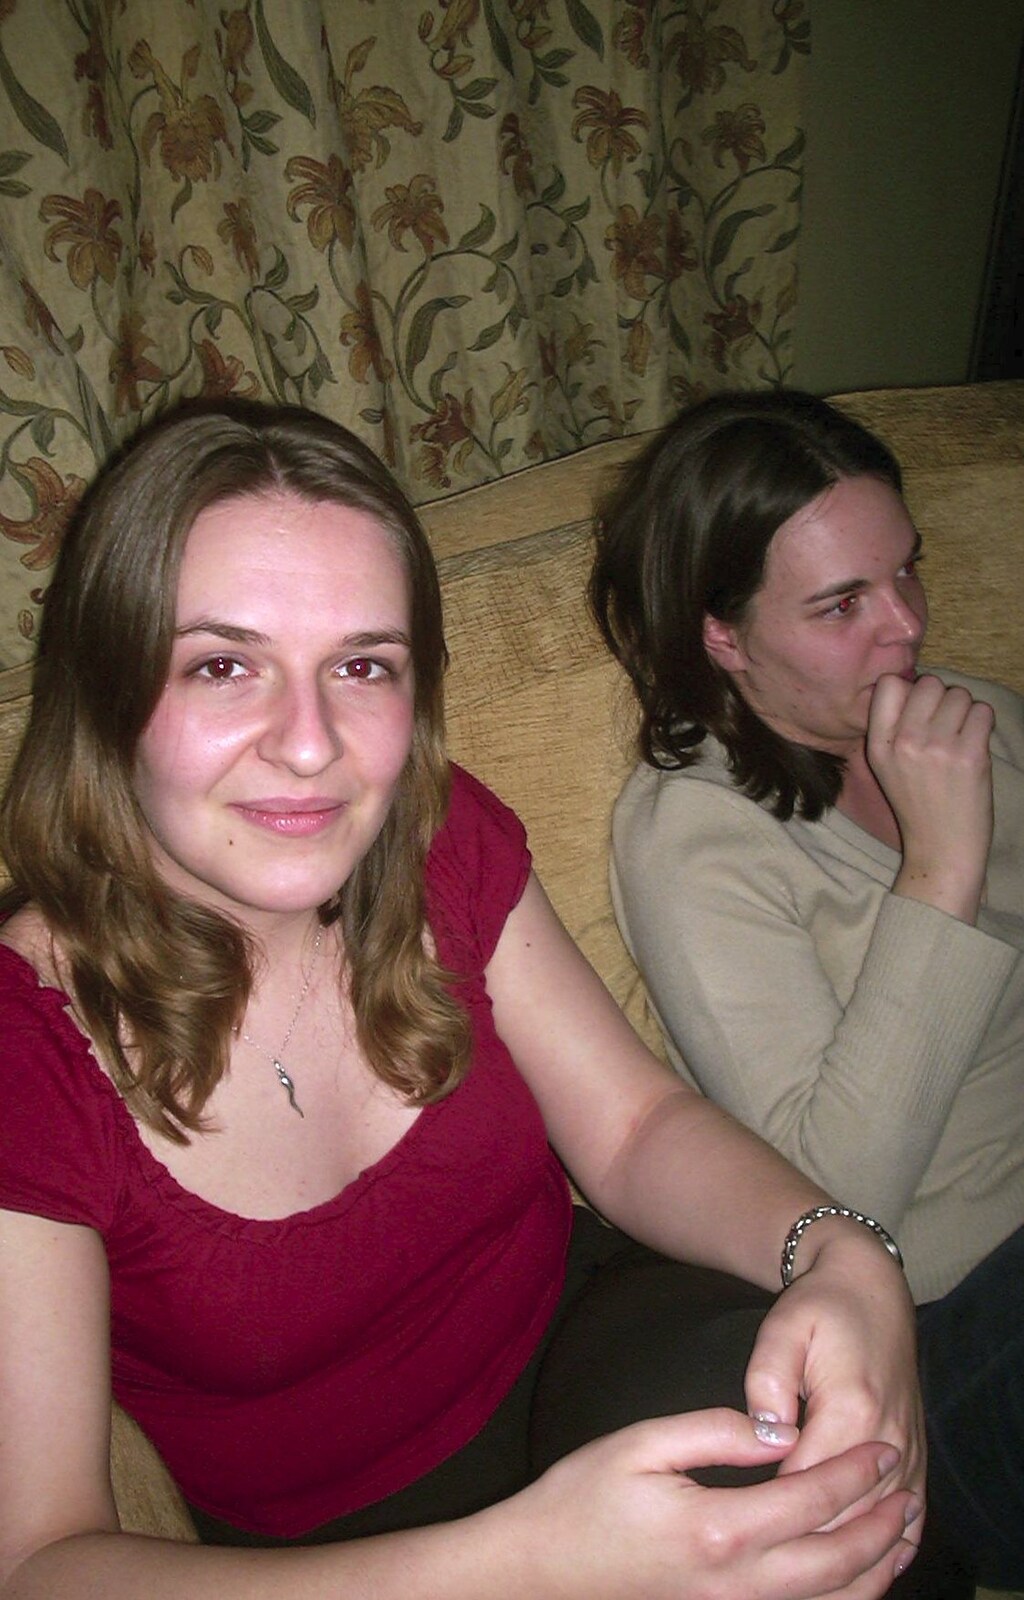 Jess and Jen from Sarah's Games Night at Anne's, Thornham, Suffolk - 27th December 2003